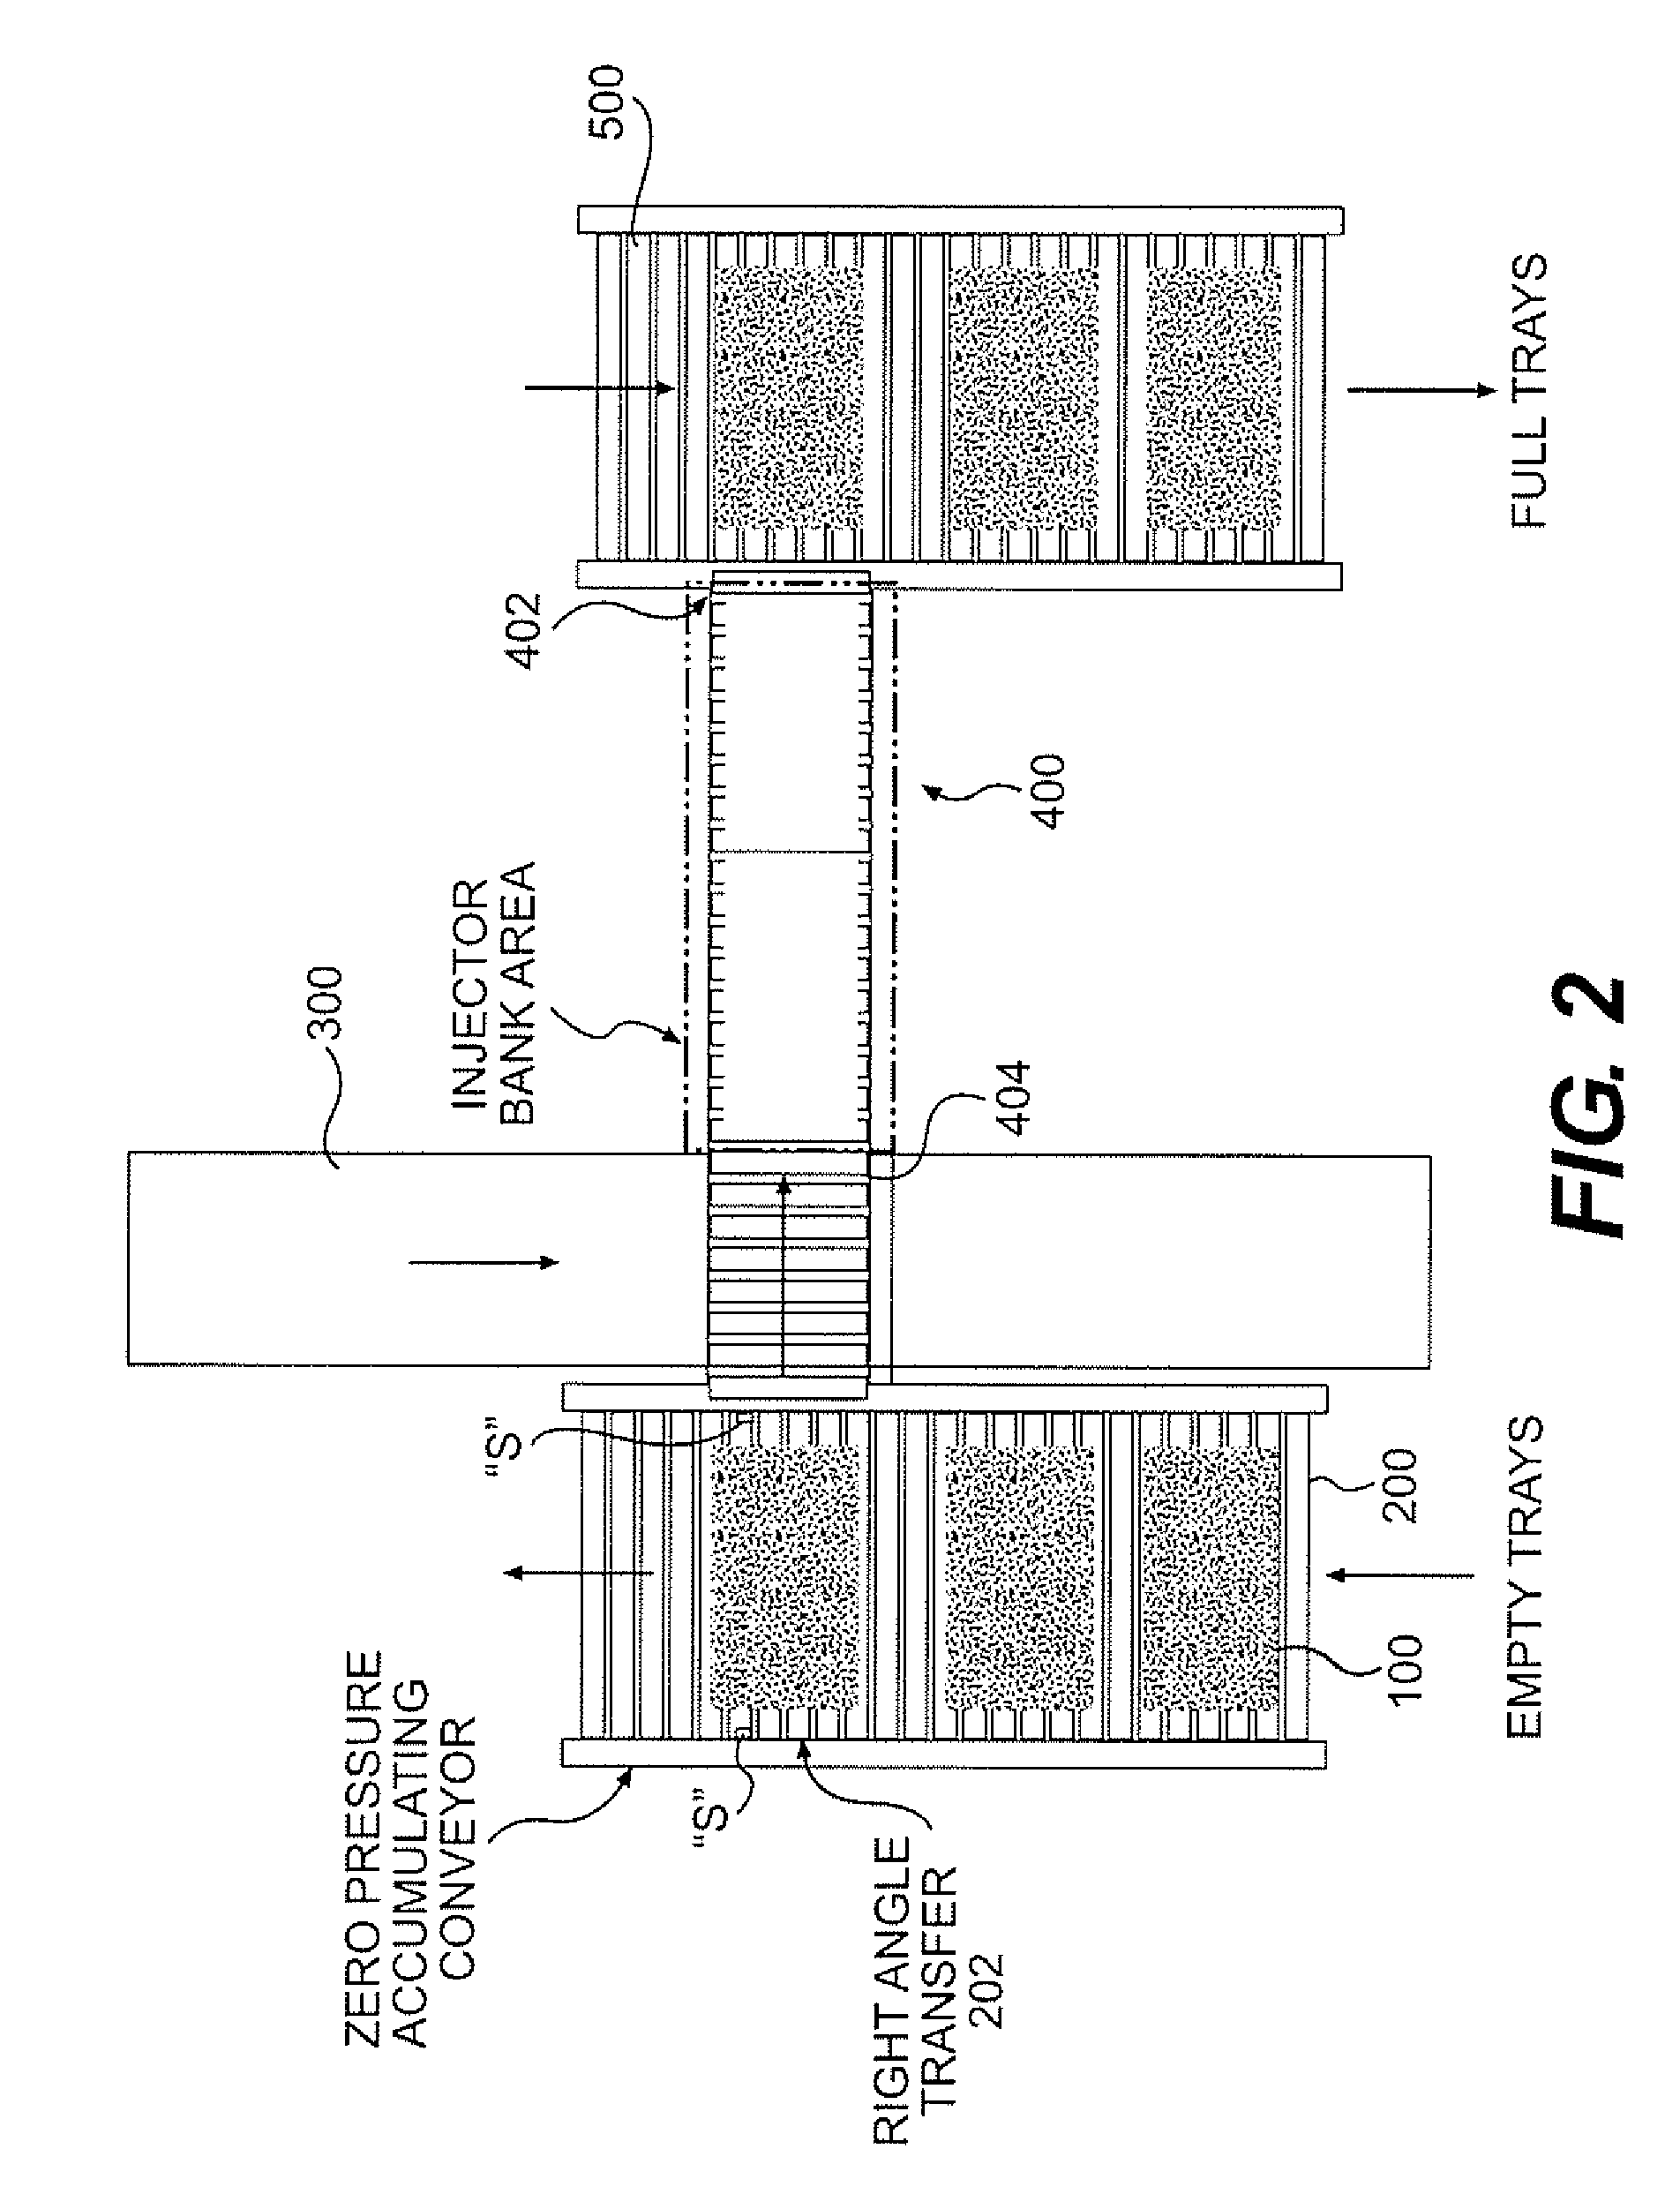 Vertical flat stacking apparatus and method of use